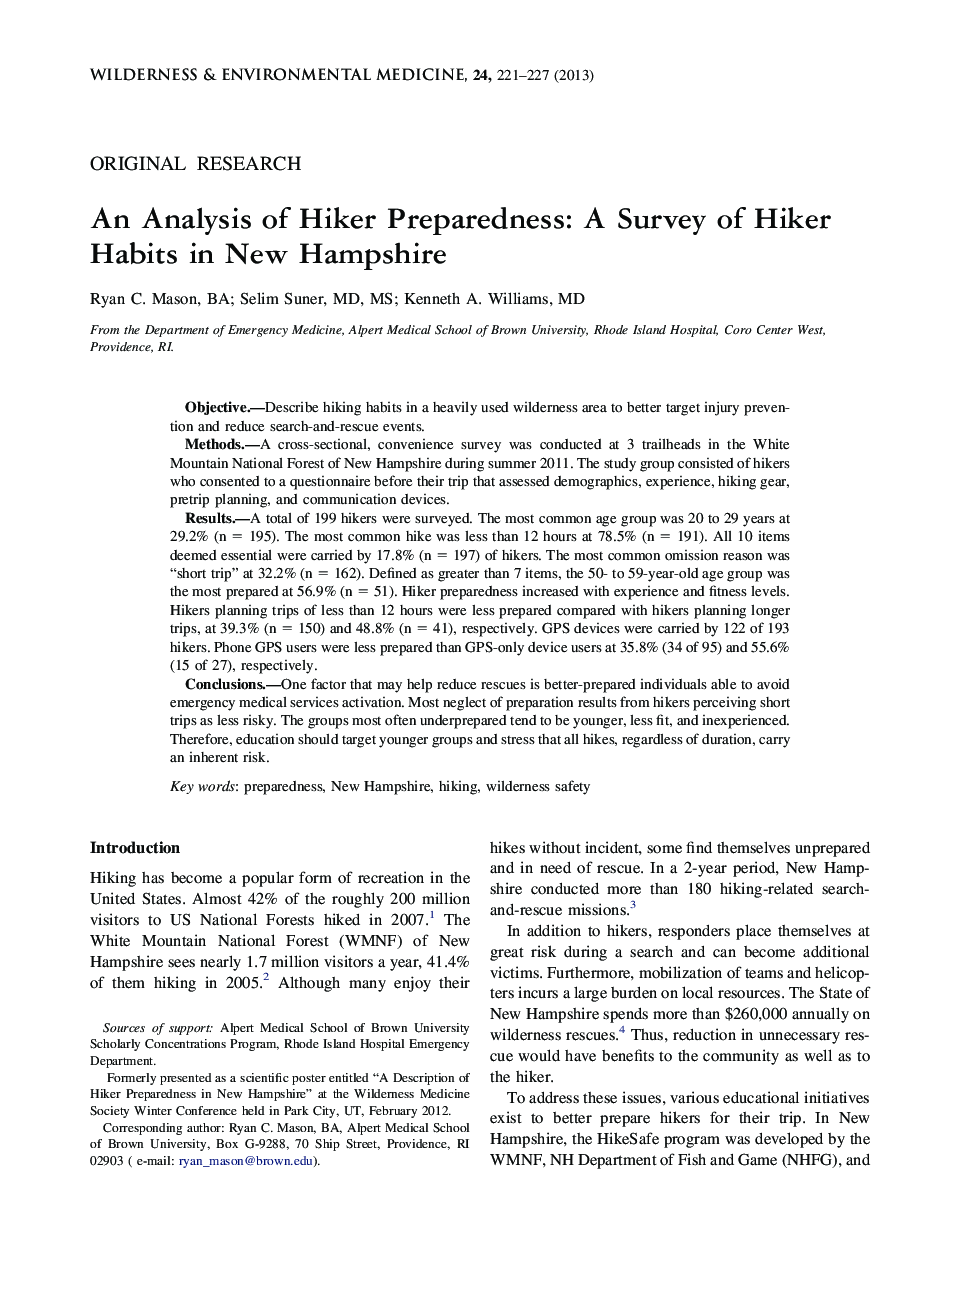 An Analysis of Hiker Preparedness: A Survey of Hiker Habits in New Hampshire 